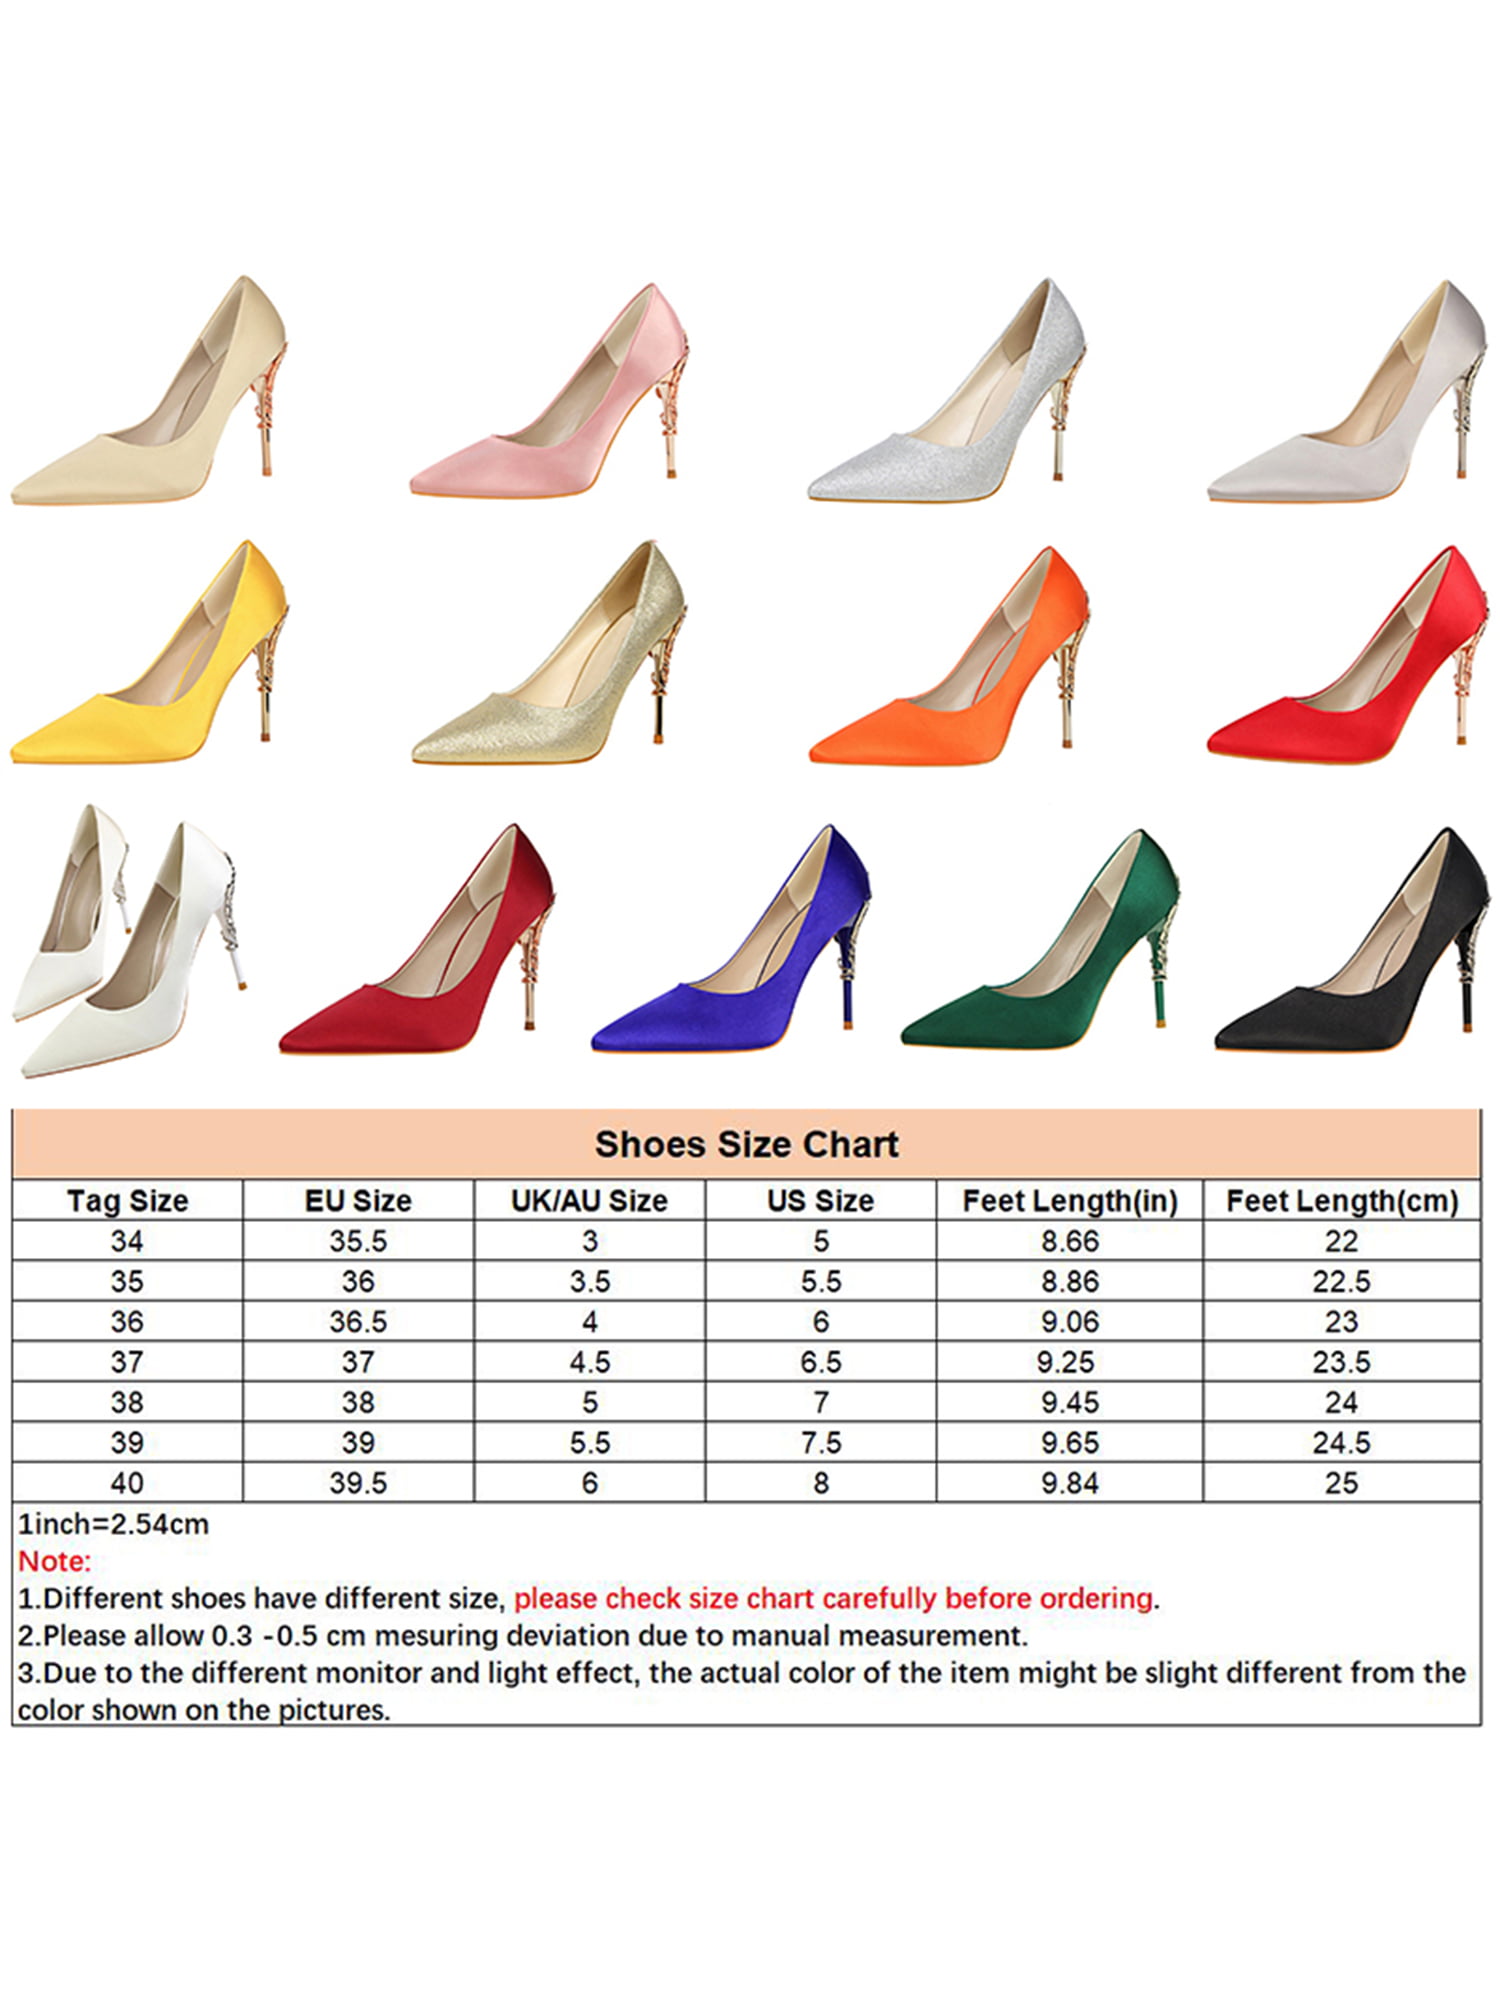  Women's Heels Pumps Pointed Toe,Red 3.94 Inch Sexy Slip-On Stiletto  Heels Party Dress Wedding Shoes,Size 5